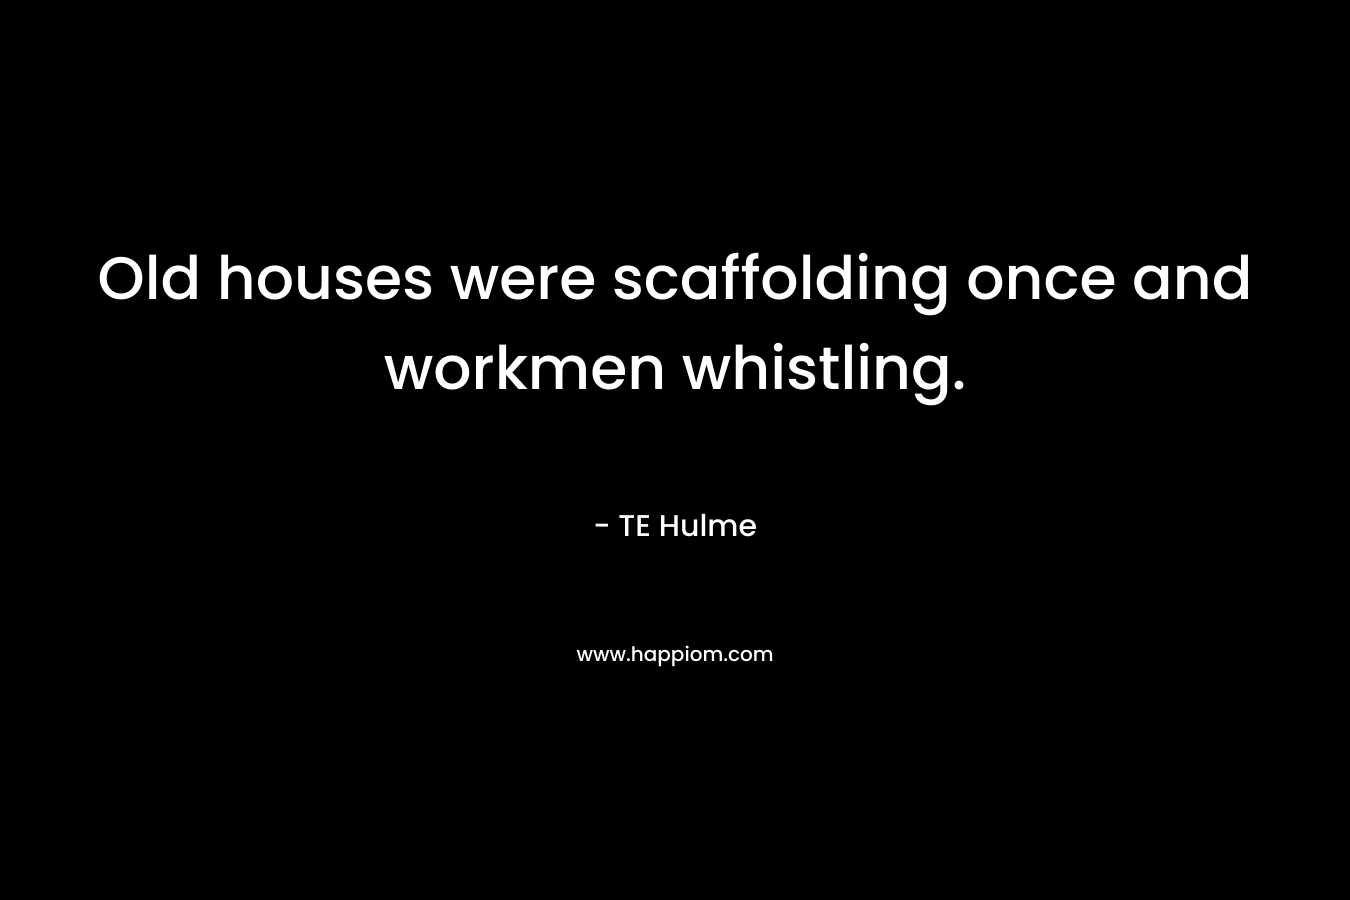 Old houses were scaffolding once and workmen whistling. – TE Hulme